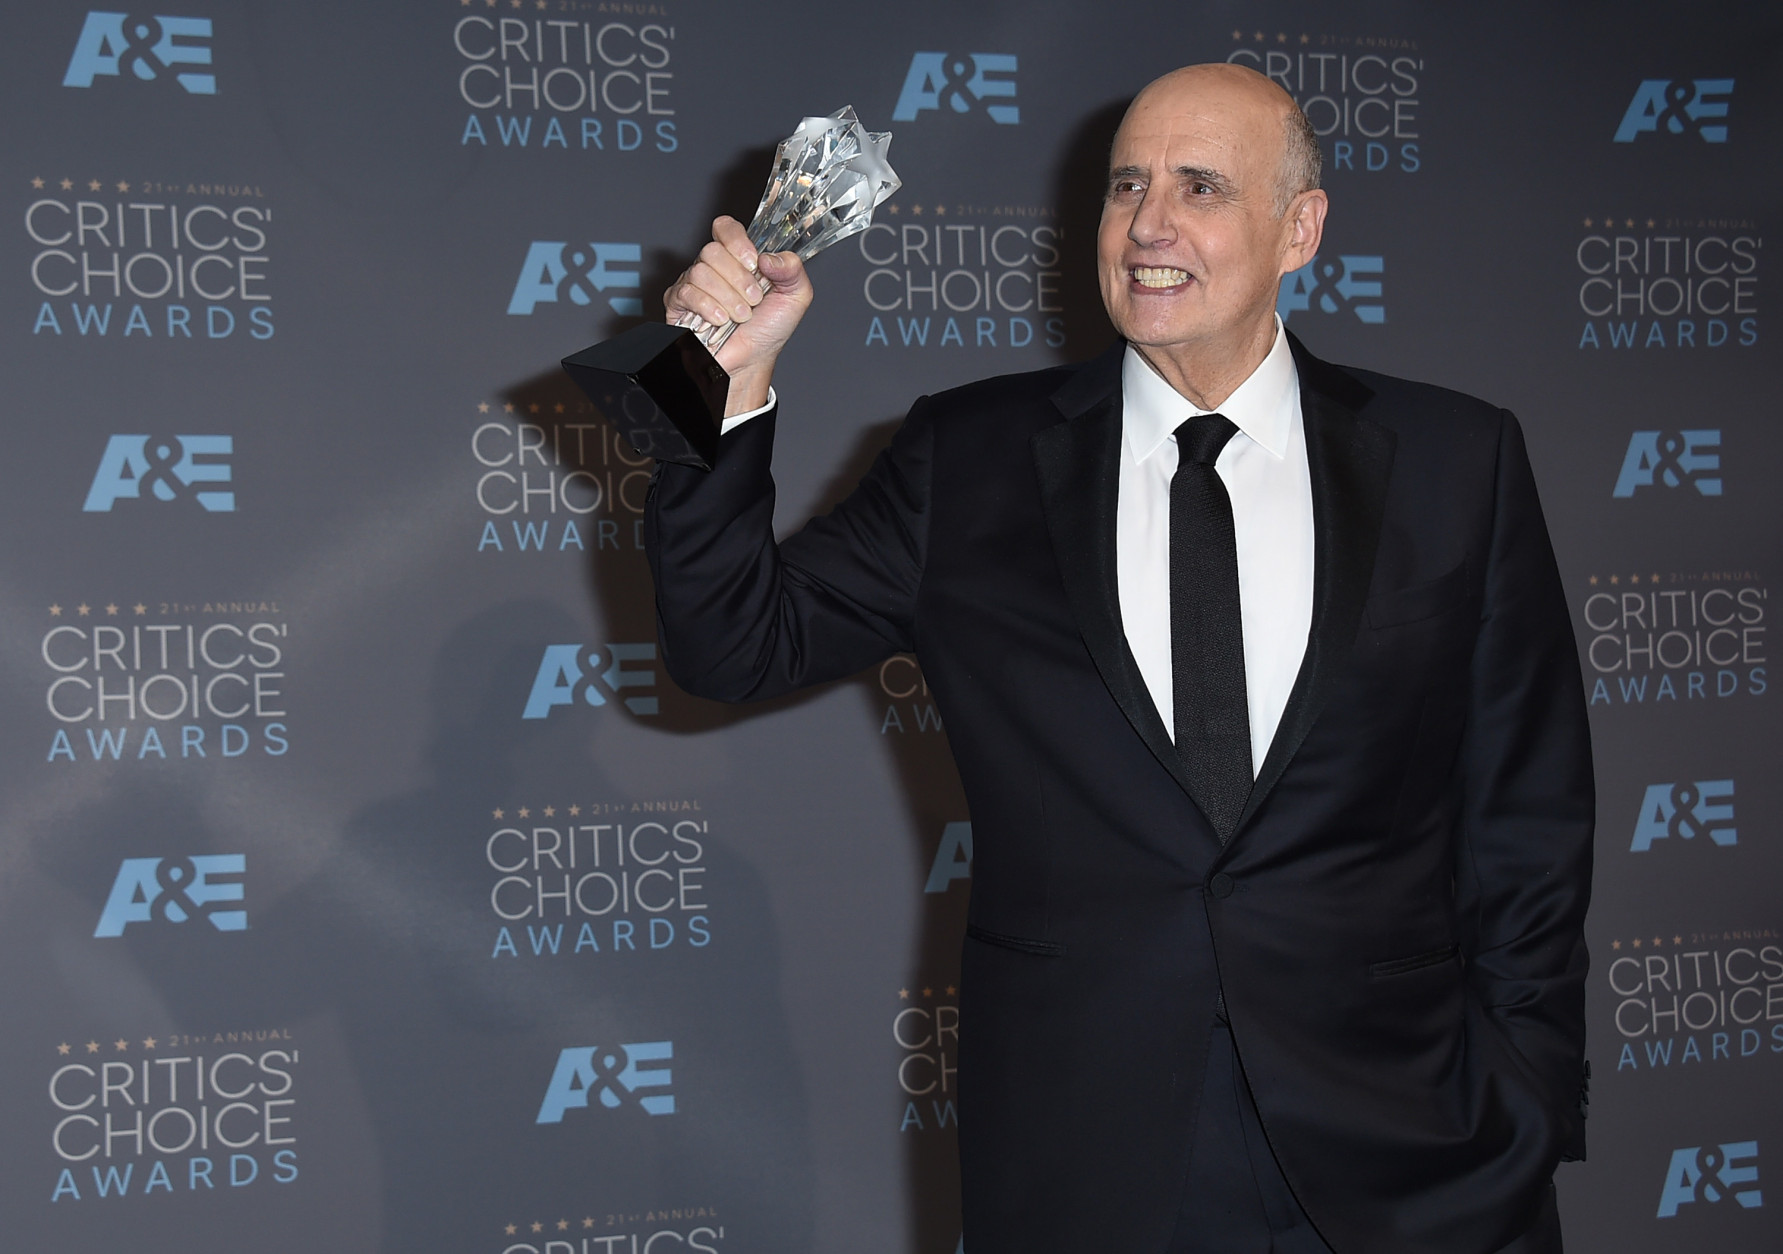 Jeffrey Tambor poses in the press room with the award for best actor in a comedy series for Transparent at the 21st annual Critics' Choice Awards at the Barker Hangar on Sunday, Jan. 17, 2016, in Santa Monica, Calif. (Photo by Jordan Strauss/Invision/AP)